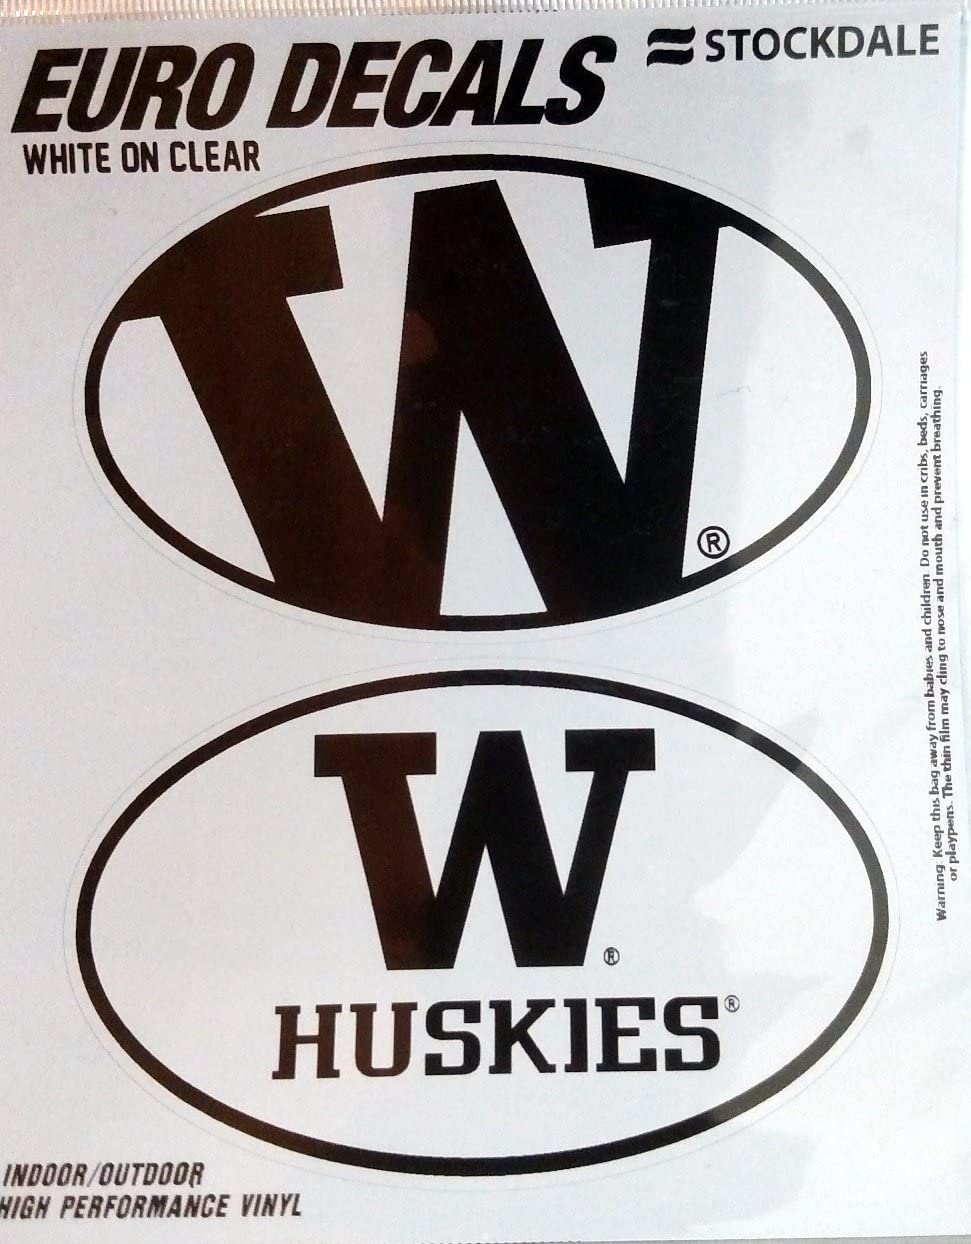 University of Washington Huskies 2-Piece White and Clear Euro Decal Sticker Set, 4x2.5 Inch Each